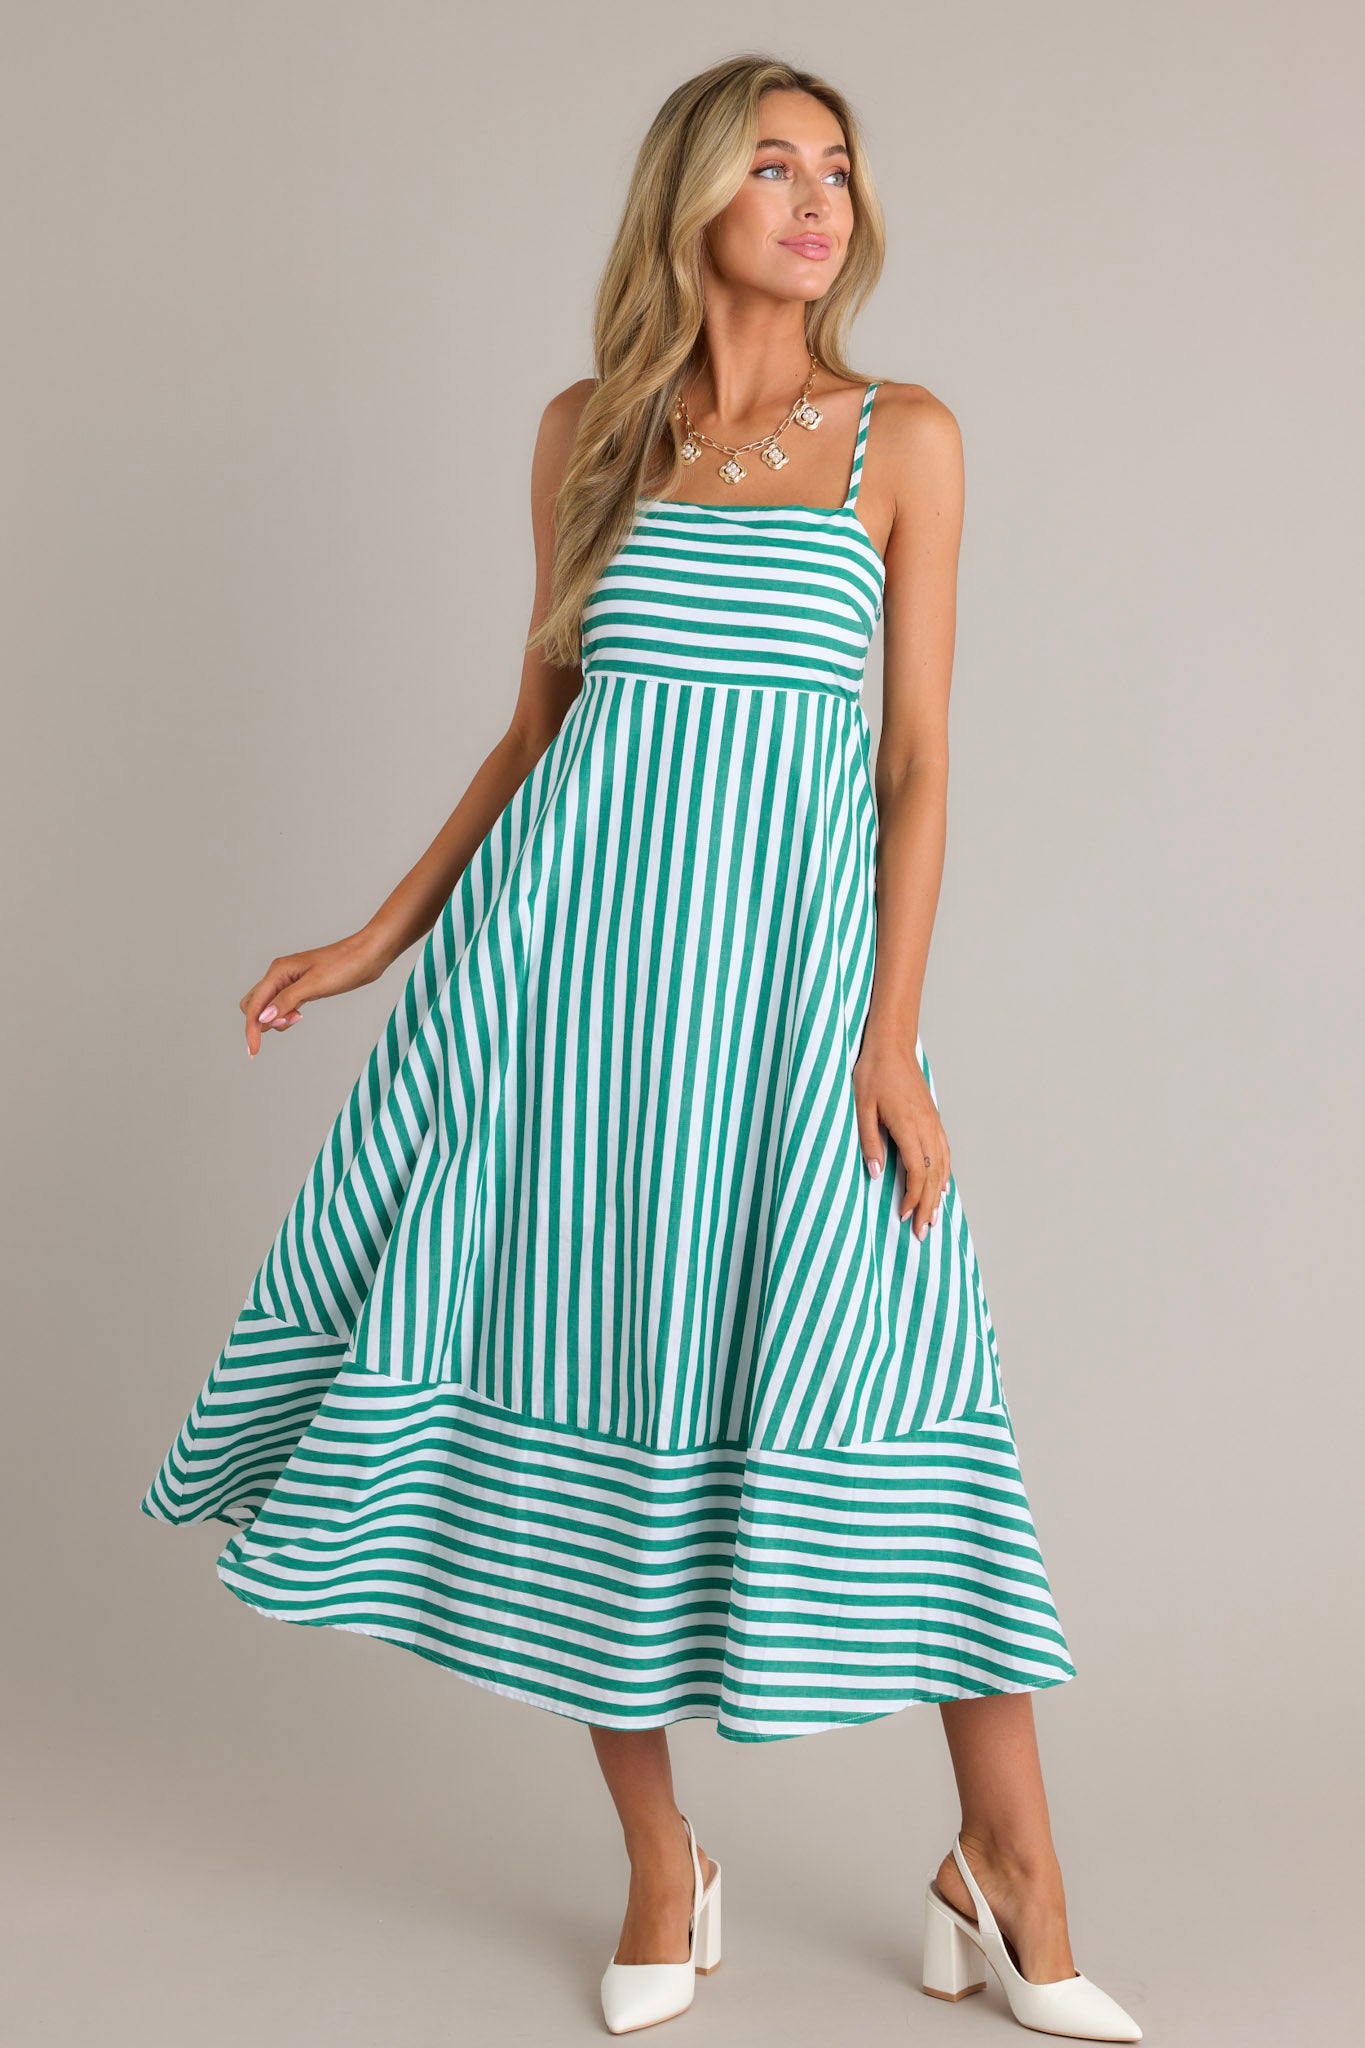 This green stripe midi dress features a square neckline, thin adjustable straps, a smocked back insert, functional hip pockets, and horizontal & vertical stripes.